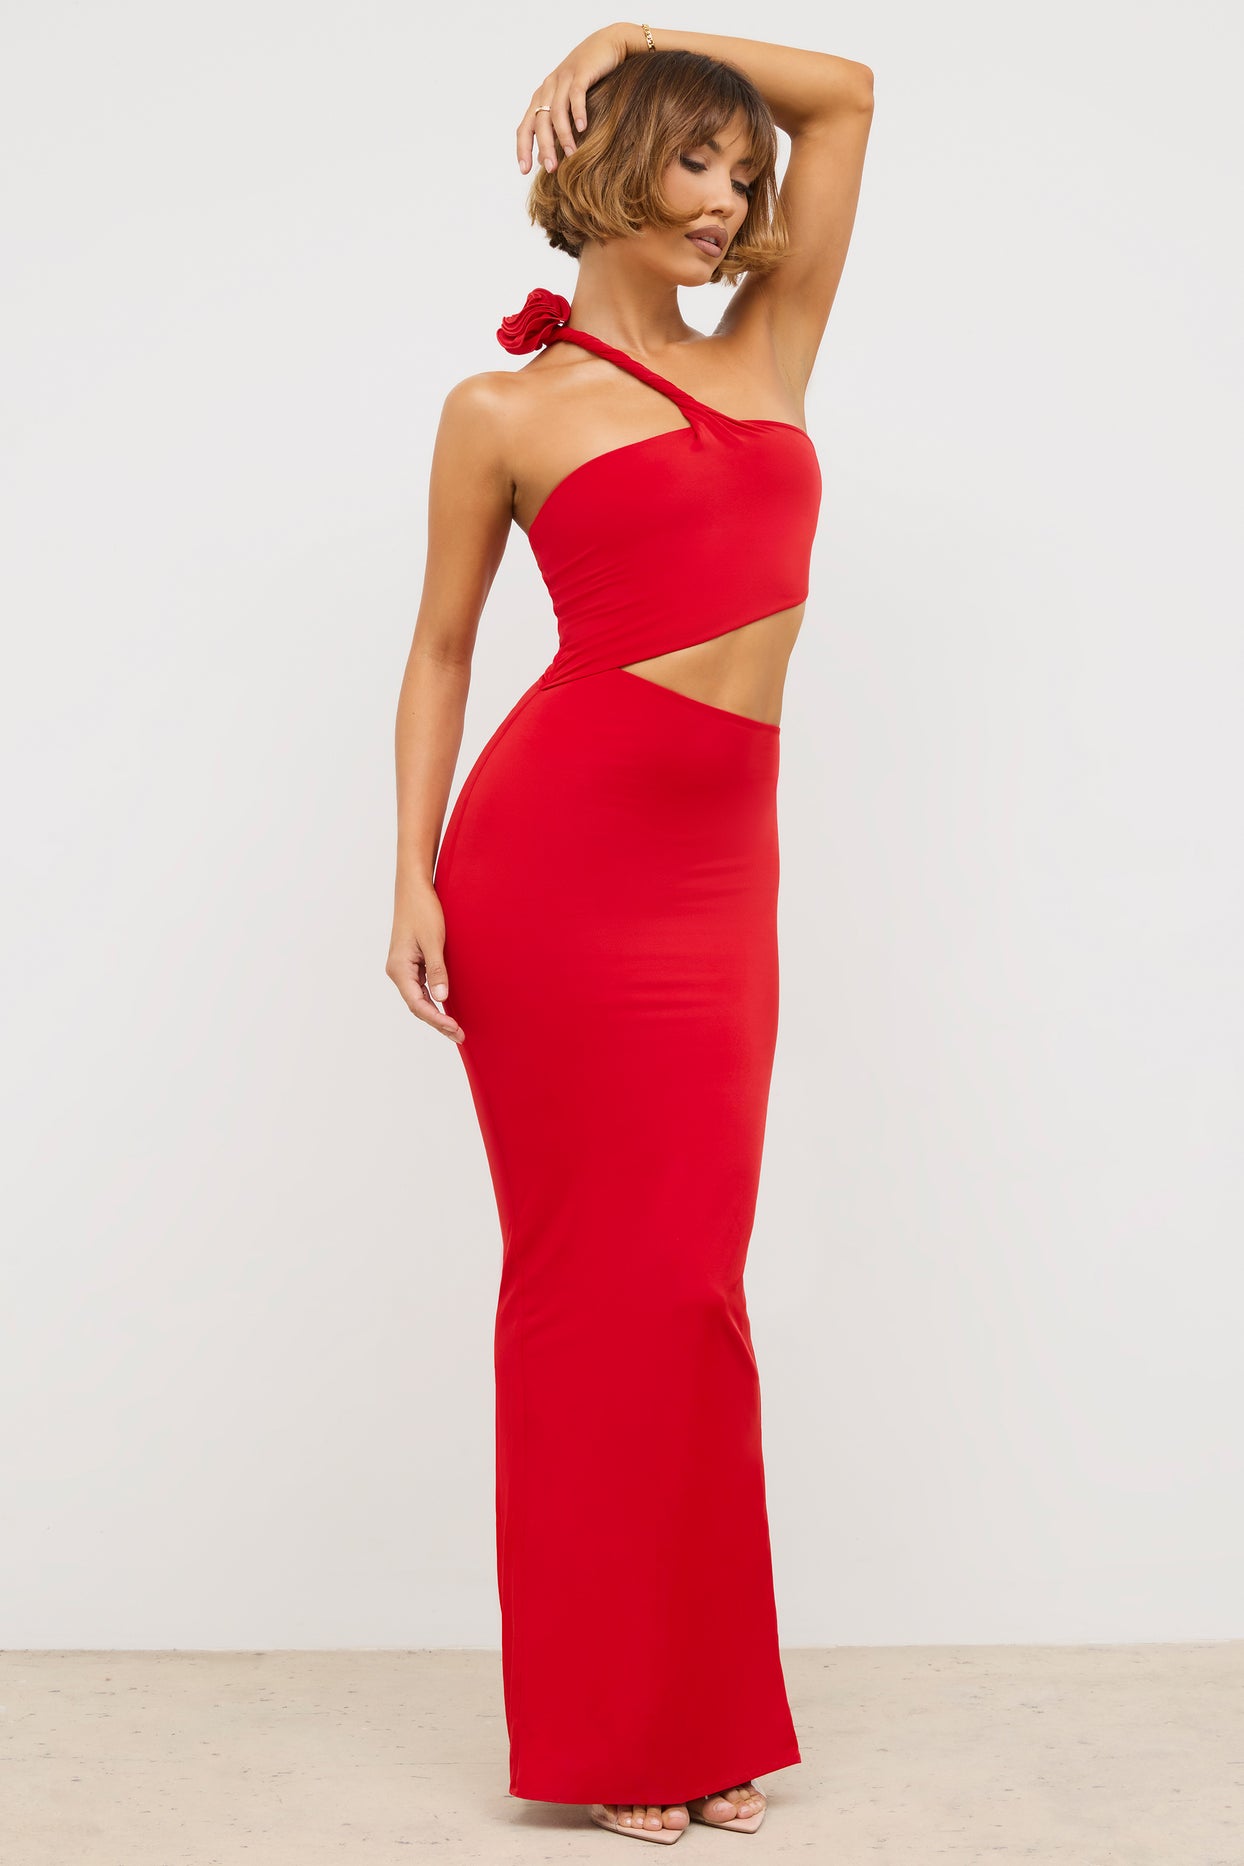 Premium Jersey Asymmetric Cut Out Maxi Dress  in Scarlet Red